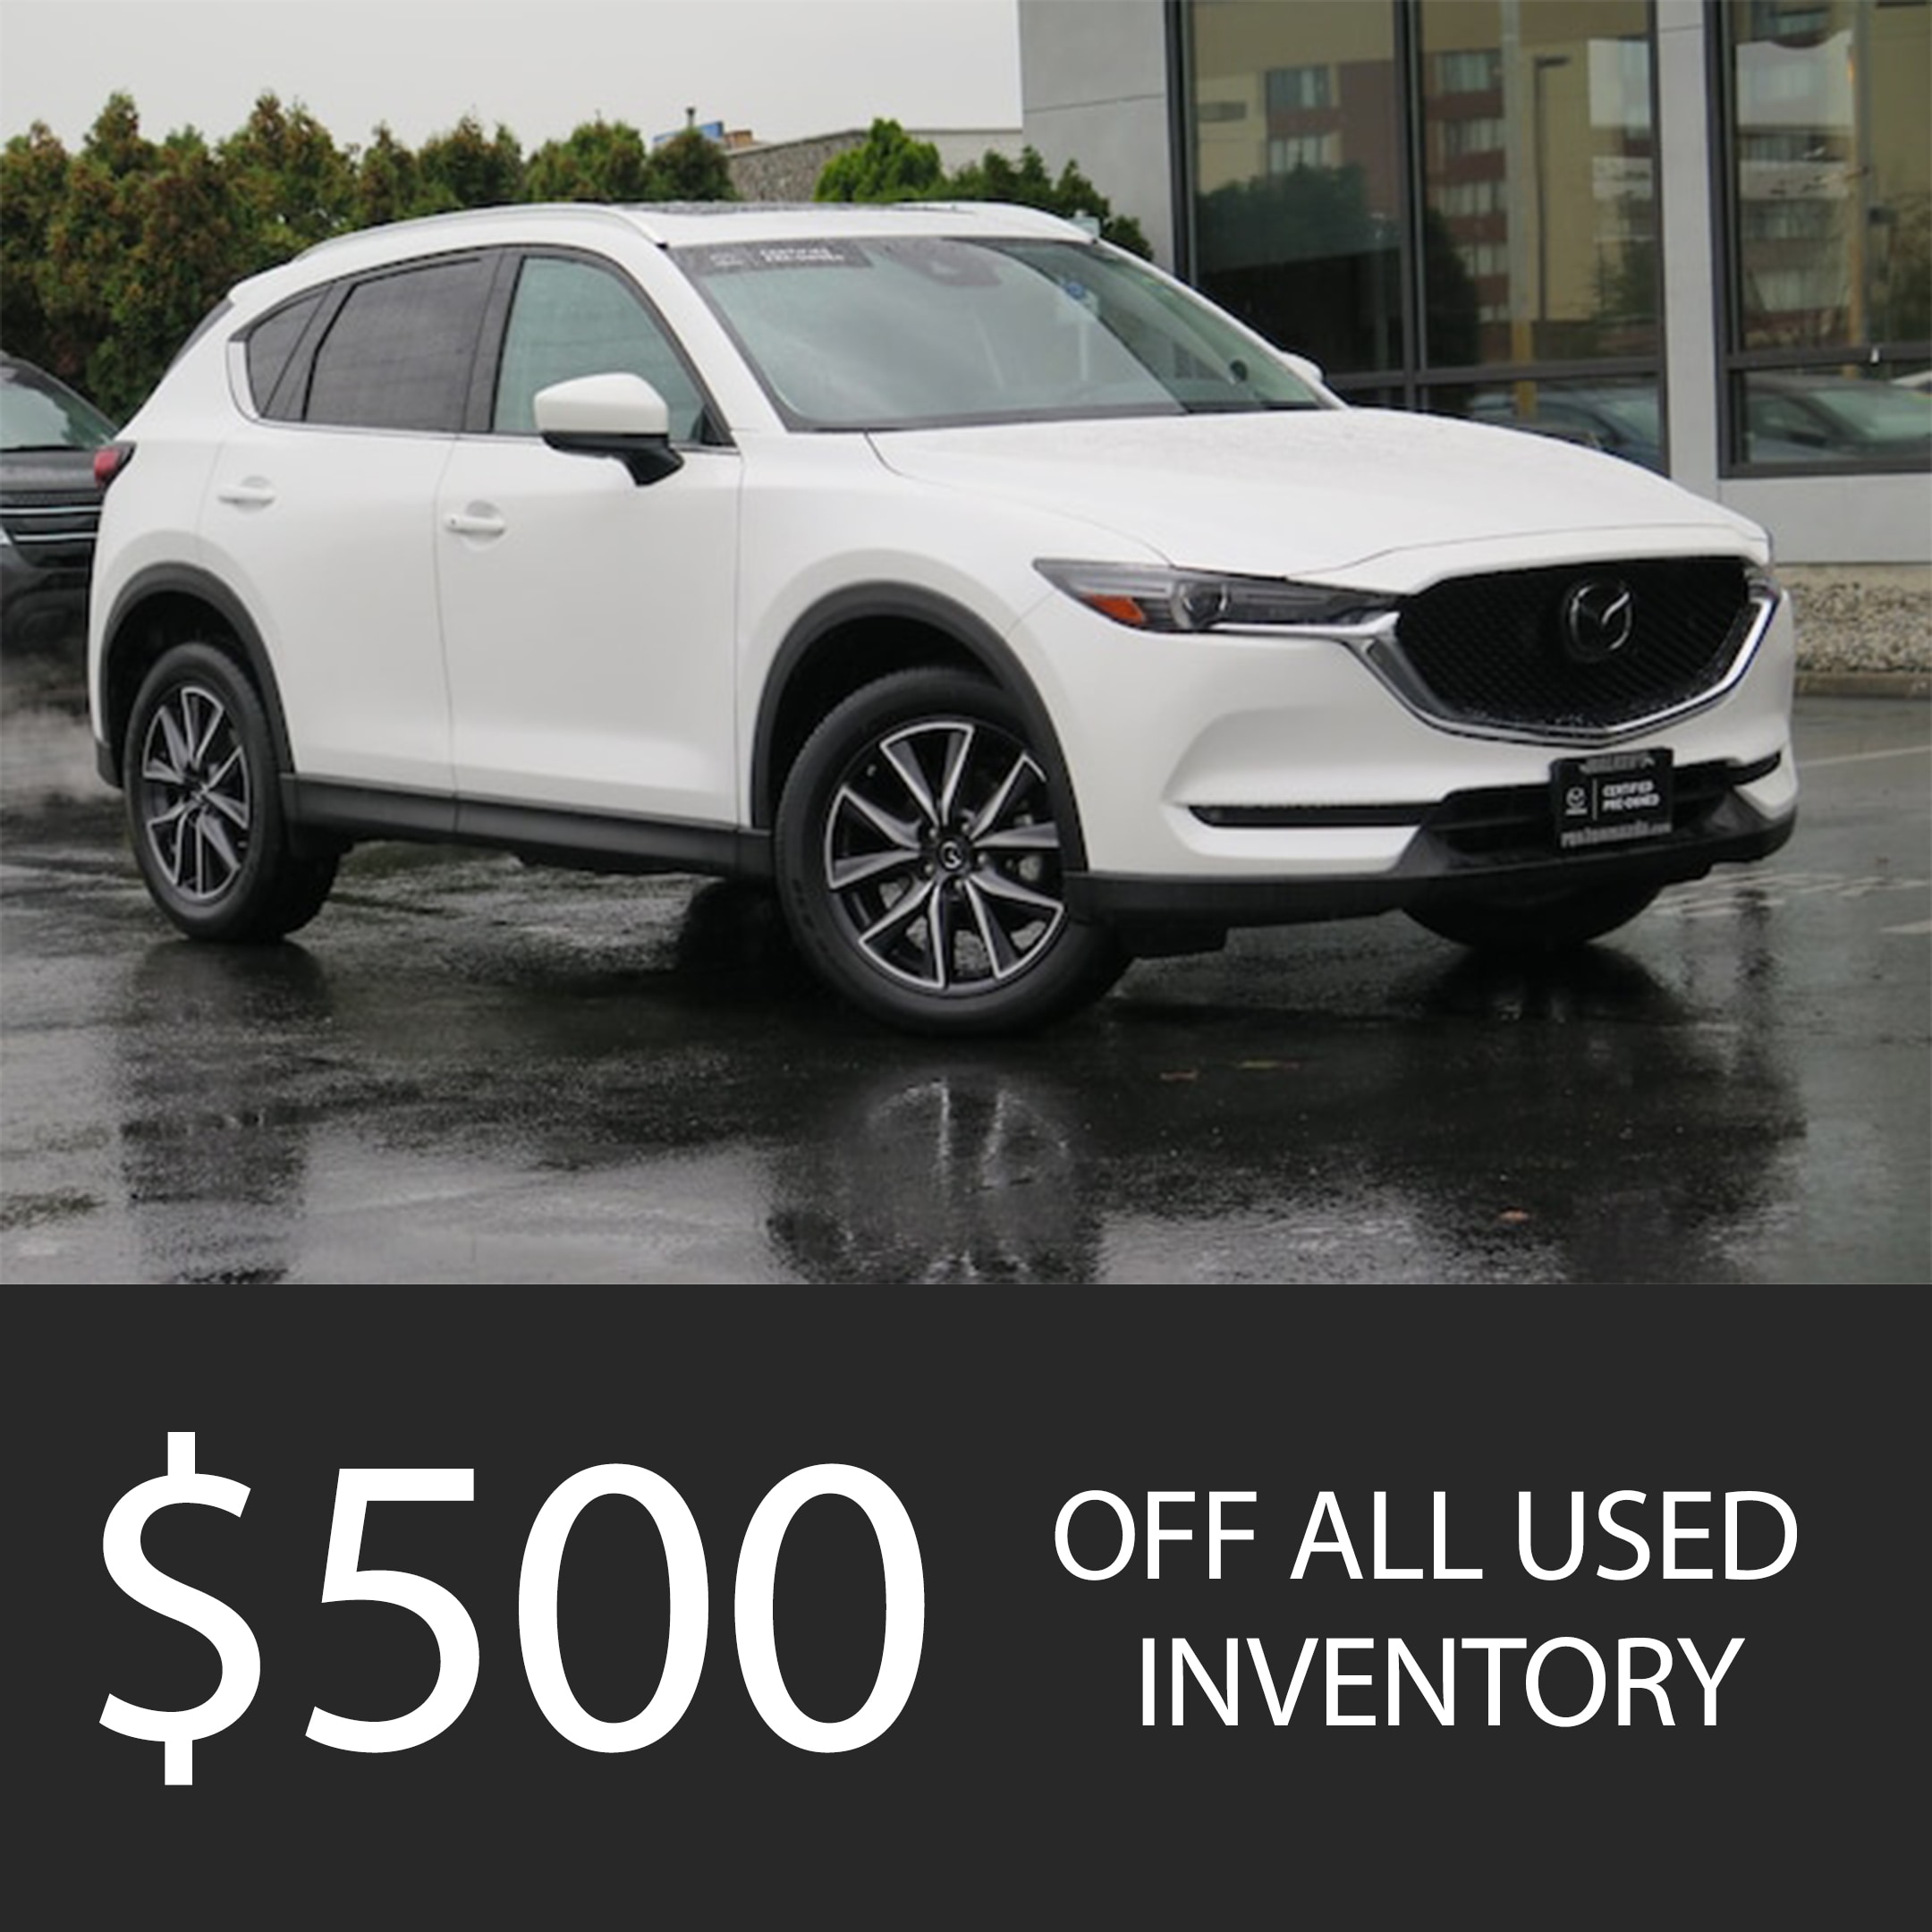 0 Off All Used and Certified Pre-Owned Inventory | Walker's Renton Mazda walker's renton mazda reviews